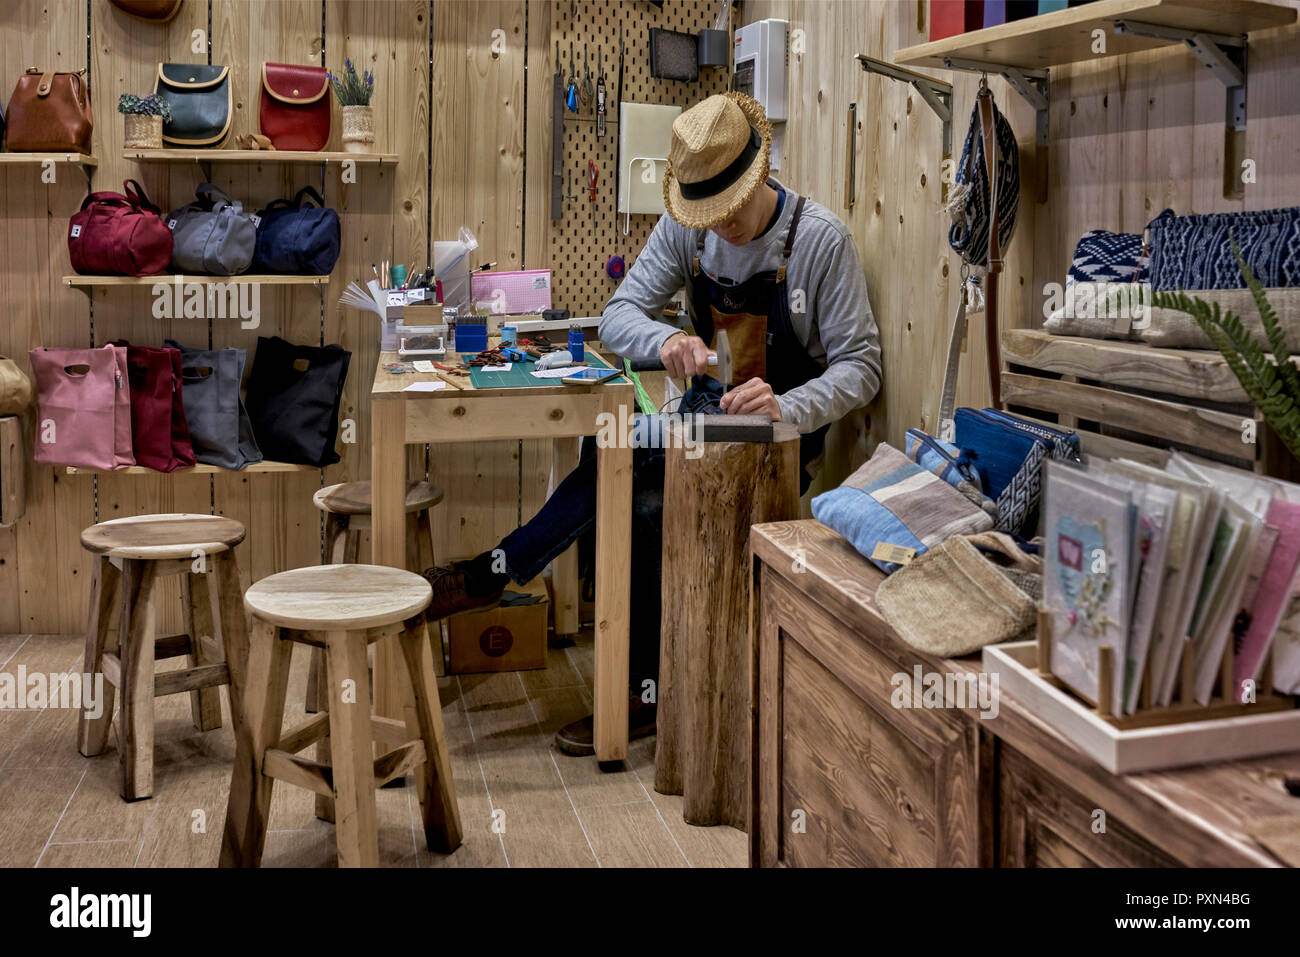 Leather shop wooden interior with shopkeeper at work Stock Photo